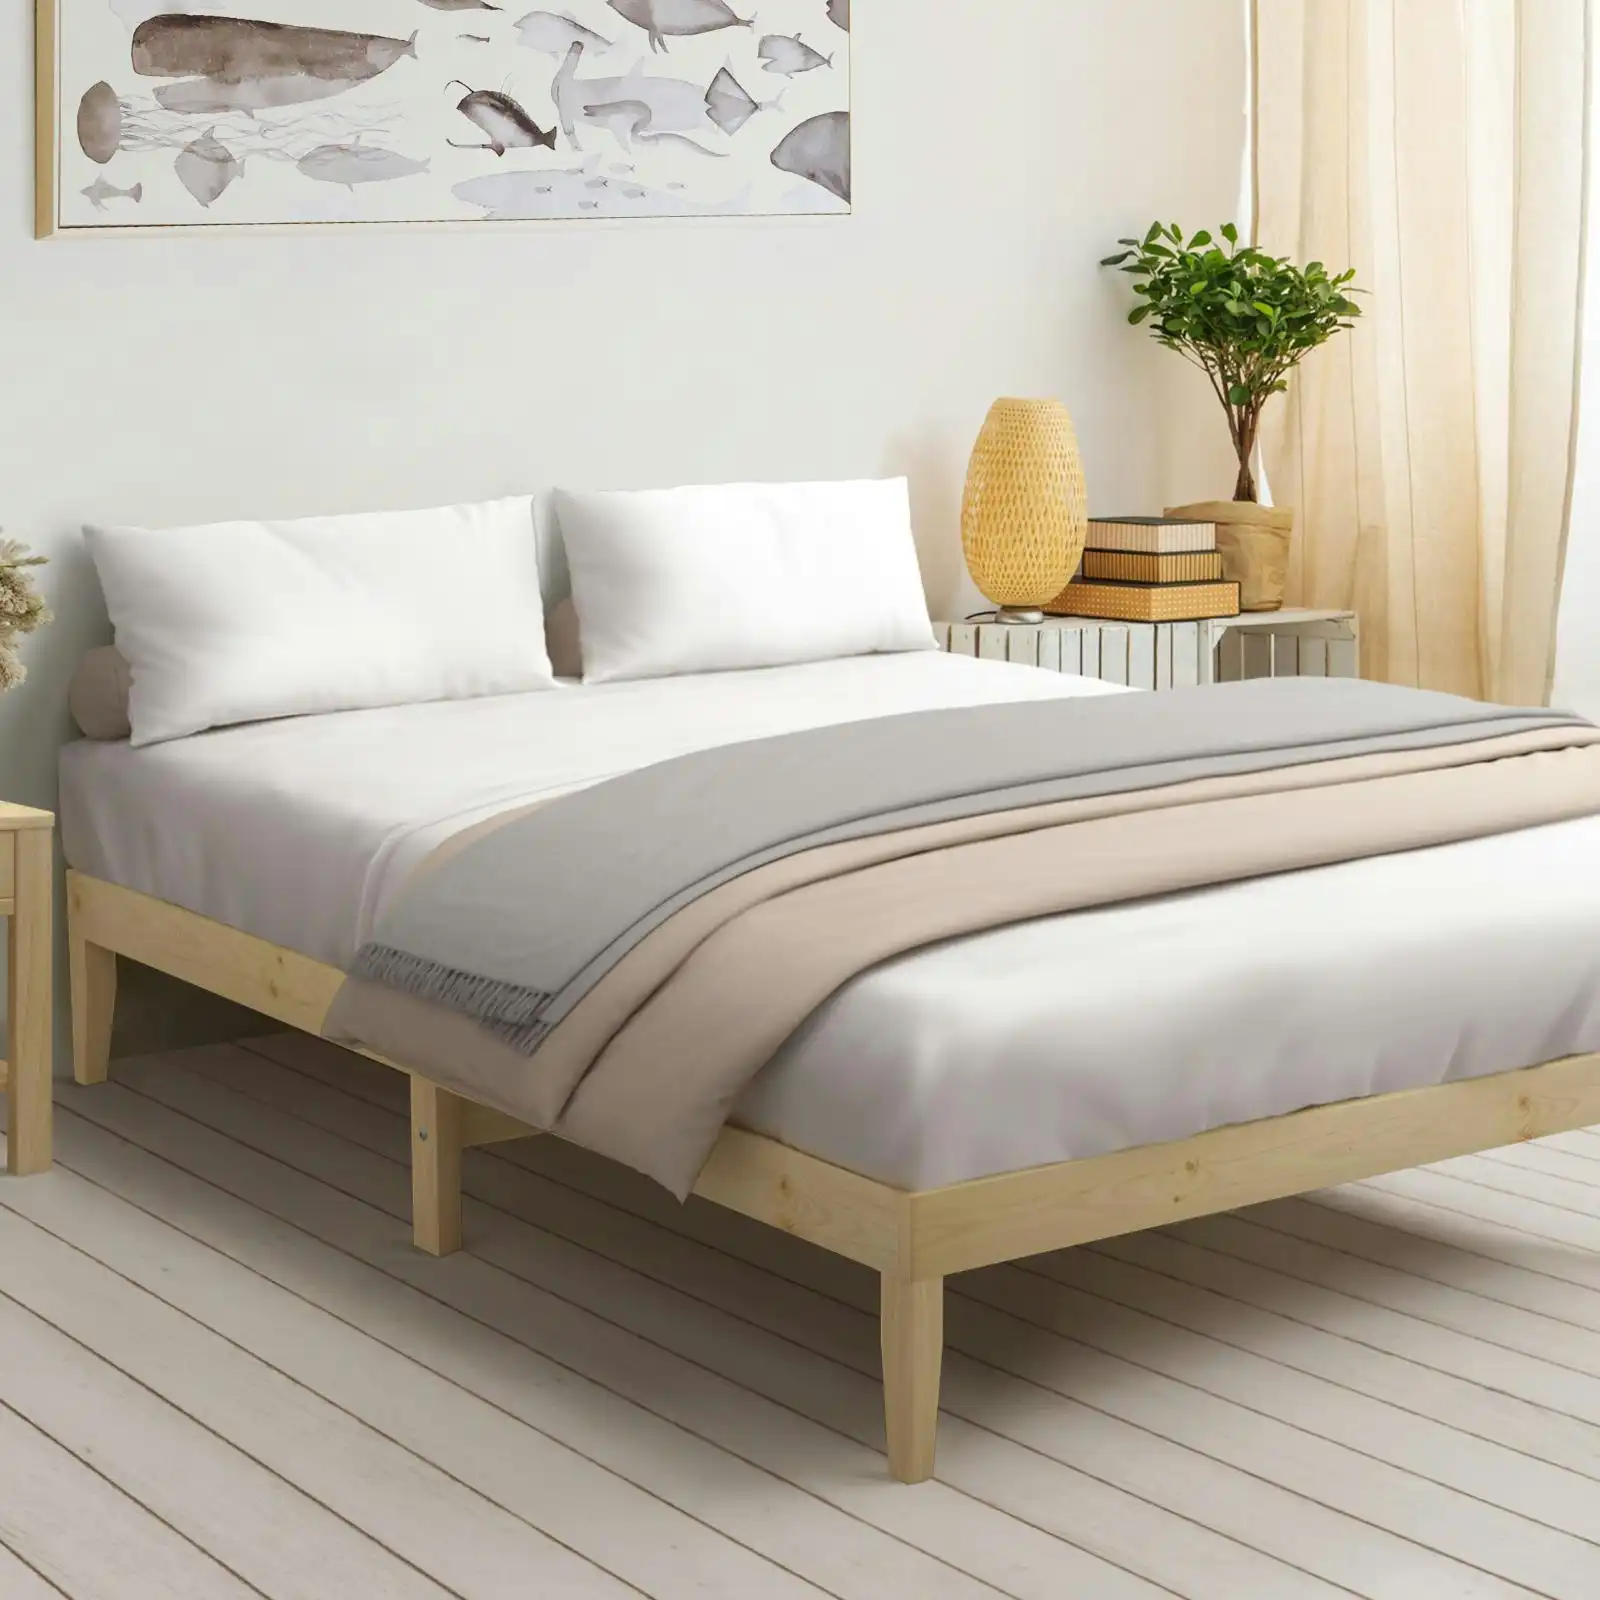 Oikiture Bed Frame Double Size Wooden Bed Base A8